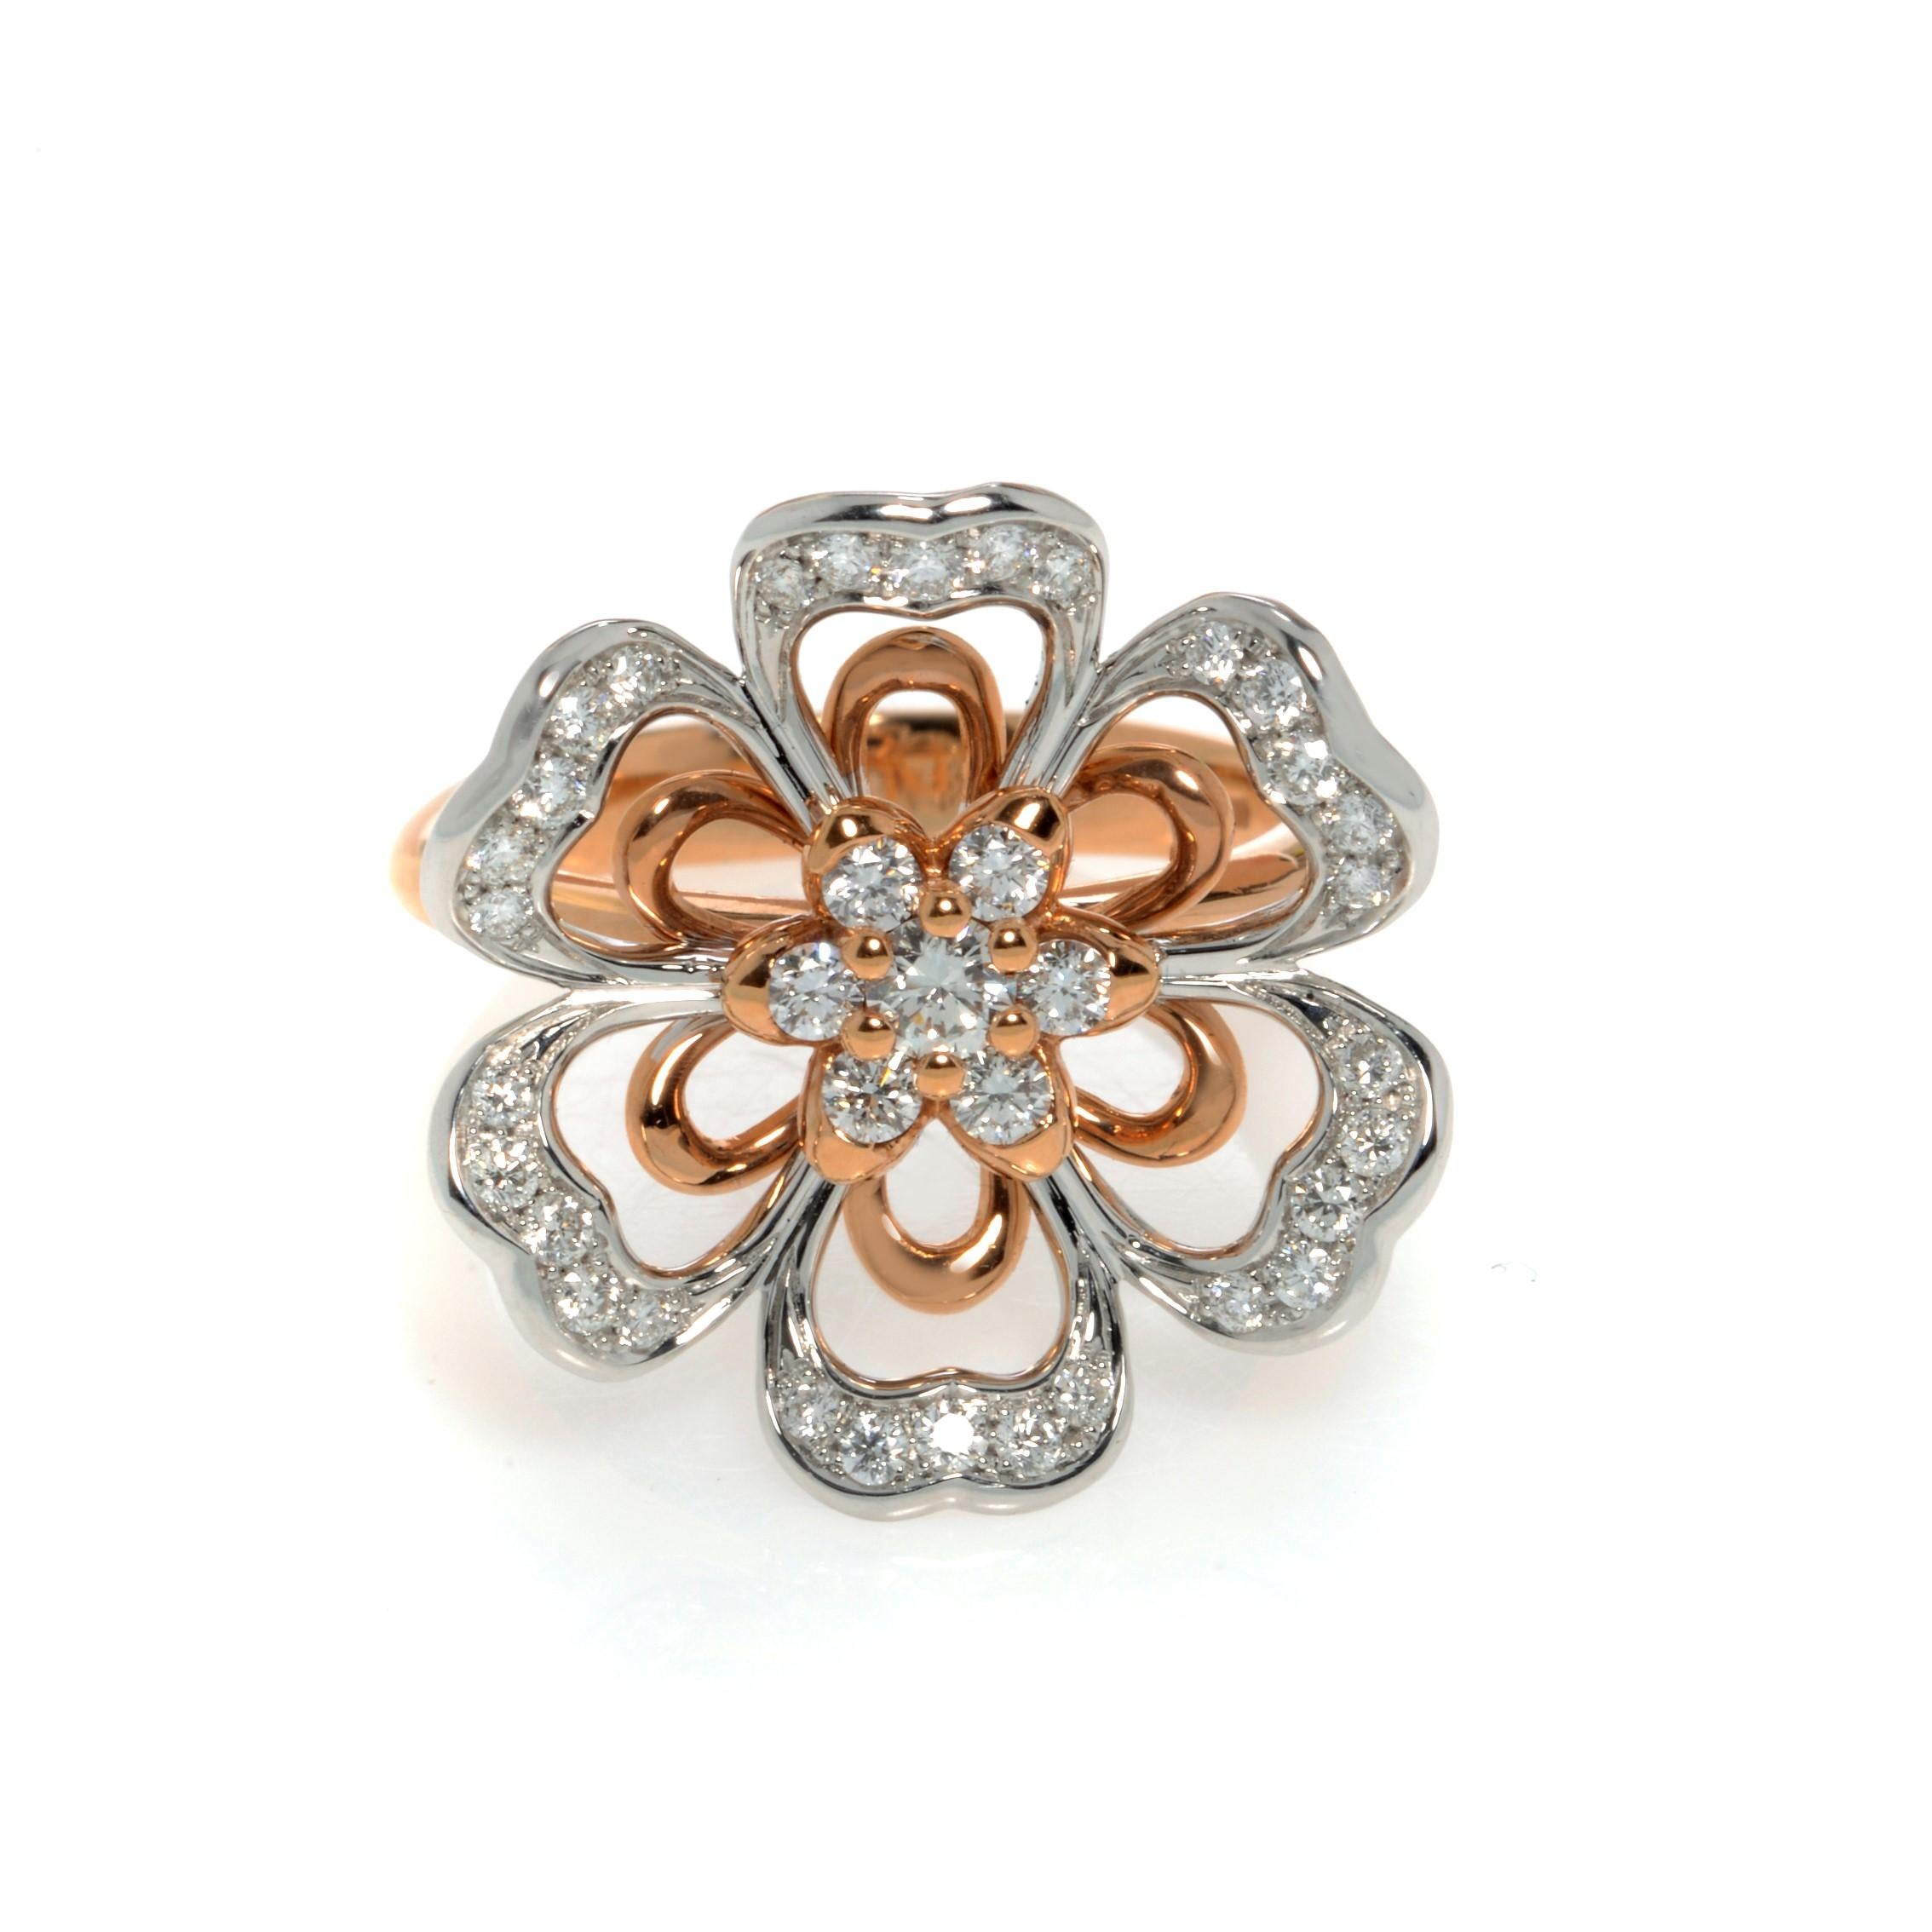 Luca Carati Diamond Flower Cocktail Ring 18K Rose Gold 0.68Cttw C080 In New Condition For Sale In New York, NY